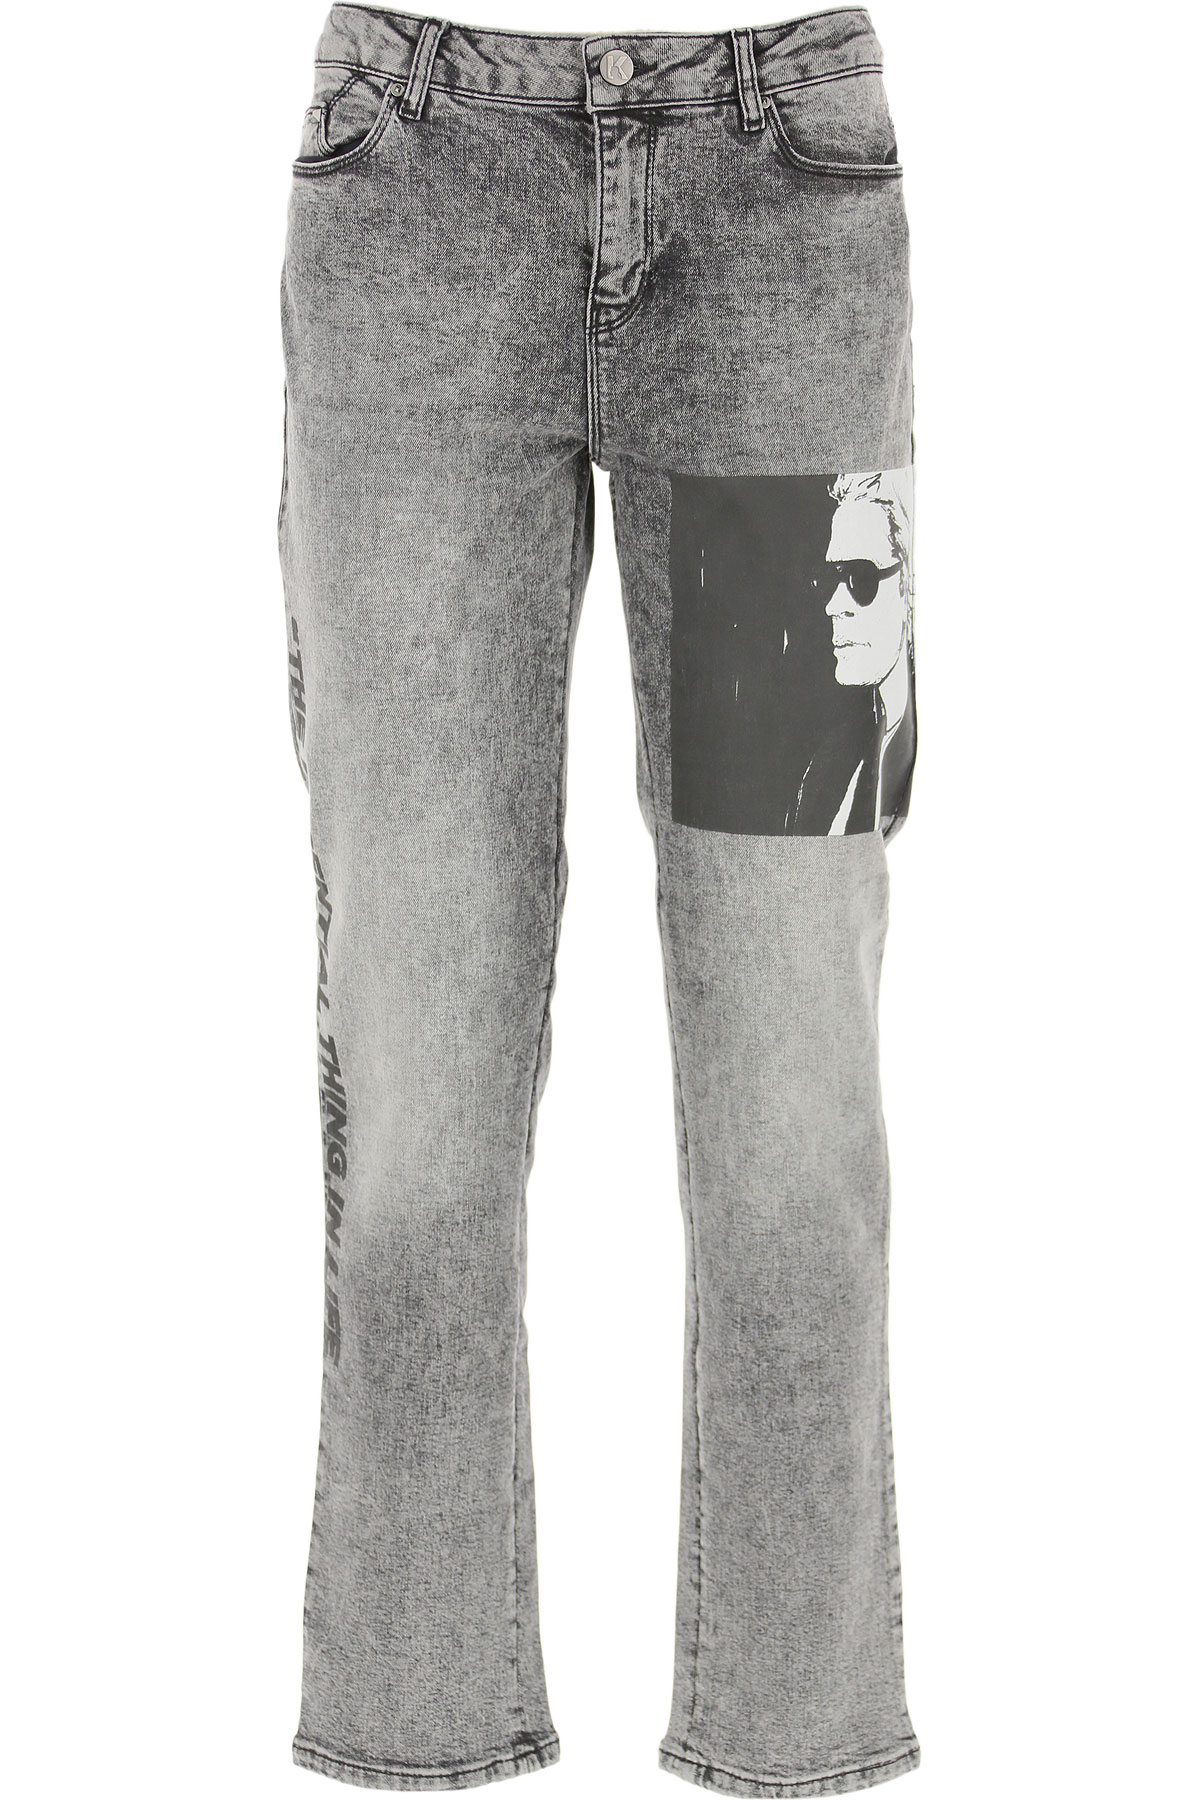 karl lagerfeld jeans prices